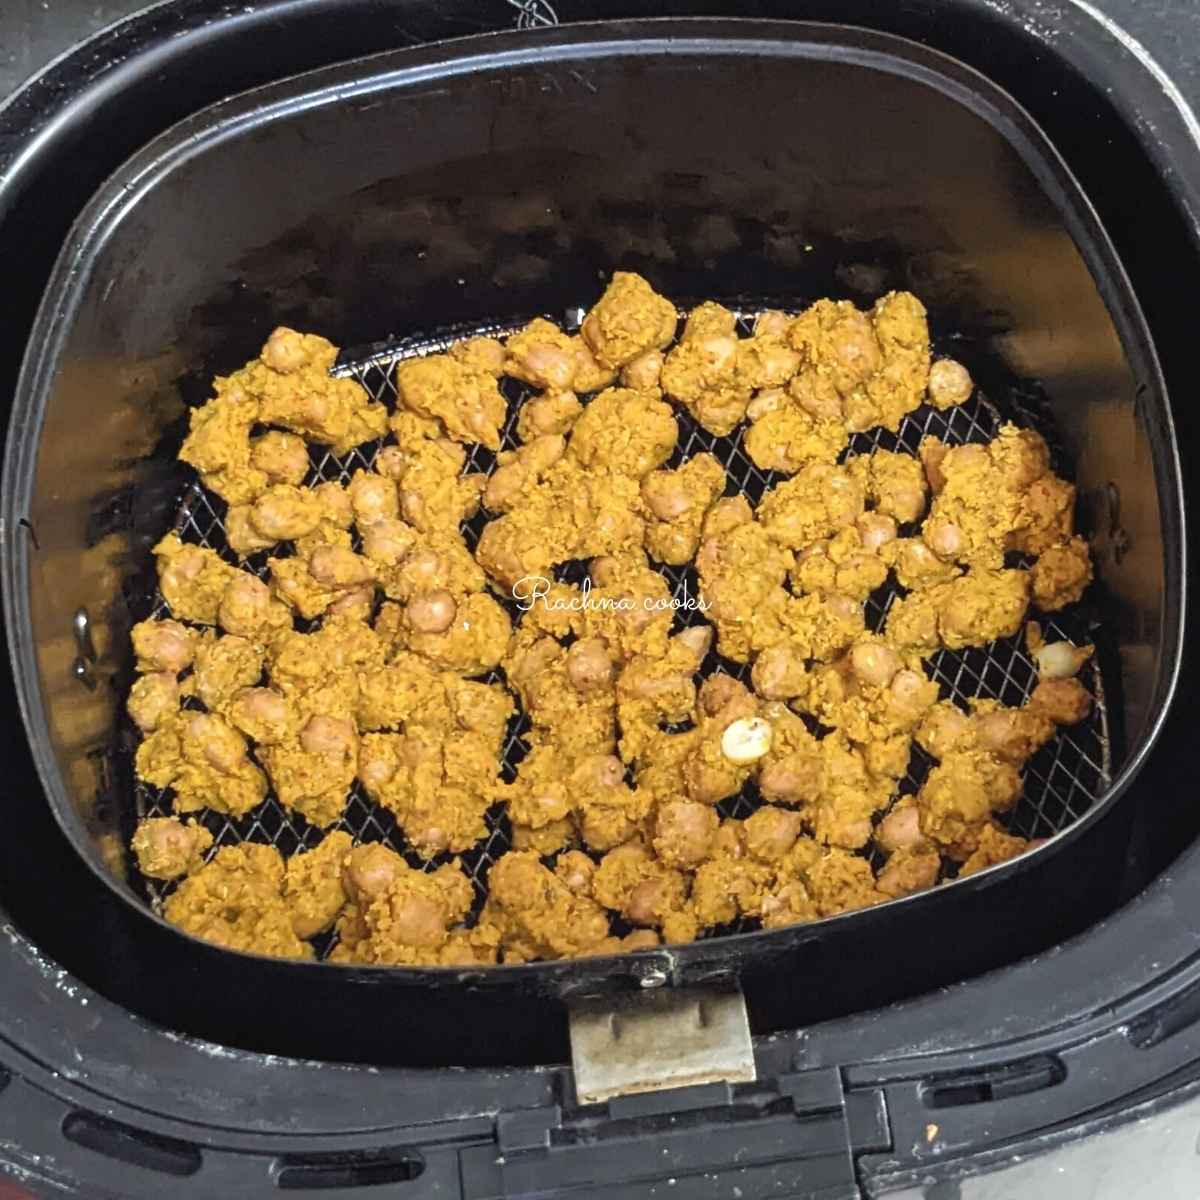 Coated peanuts placed in a single layer in air fryer basket.